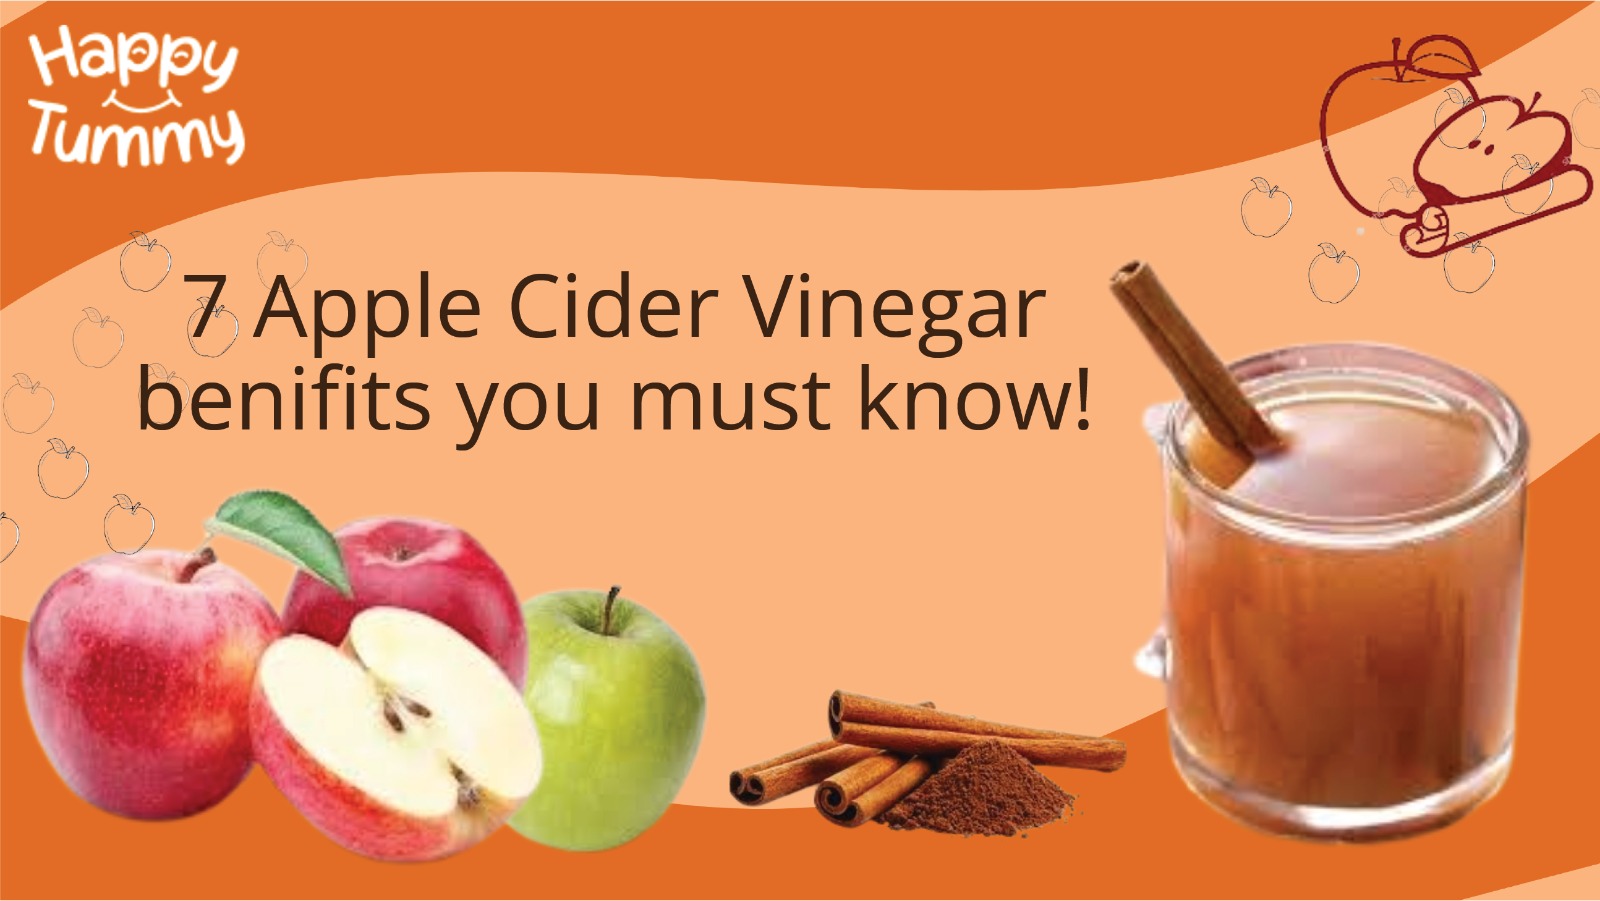 7 Apple Cider Vinegar Health Benefits, Uses and Side effects!